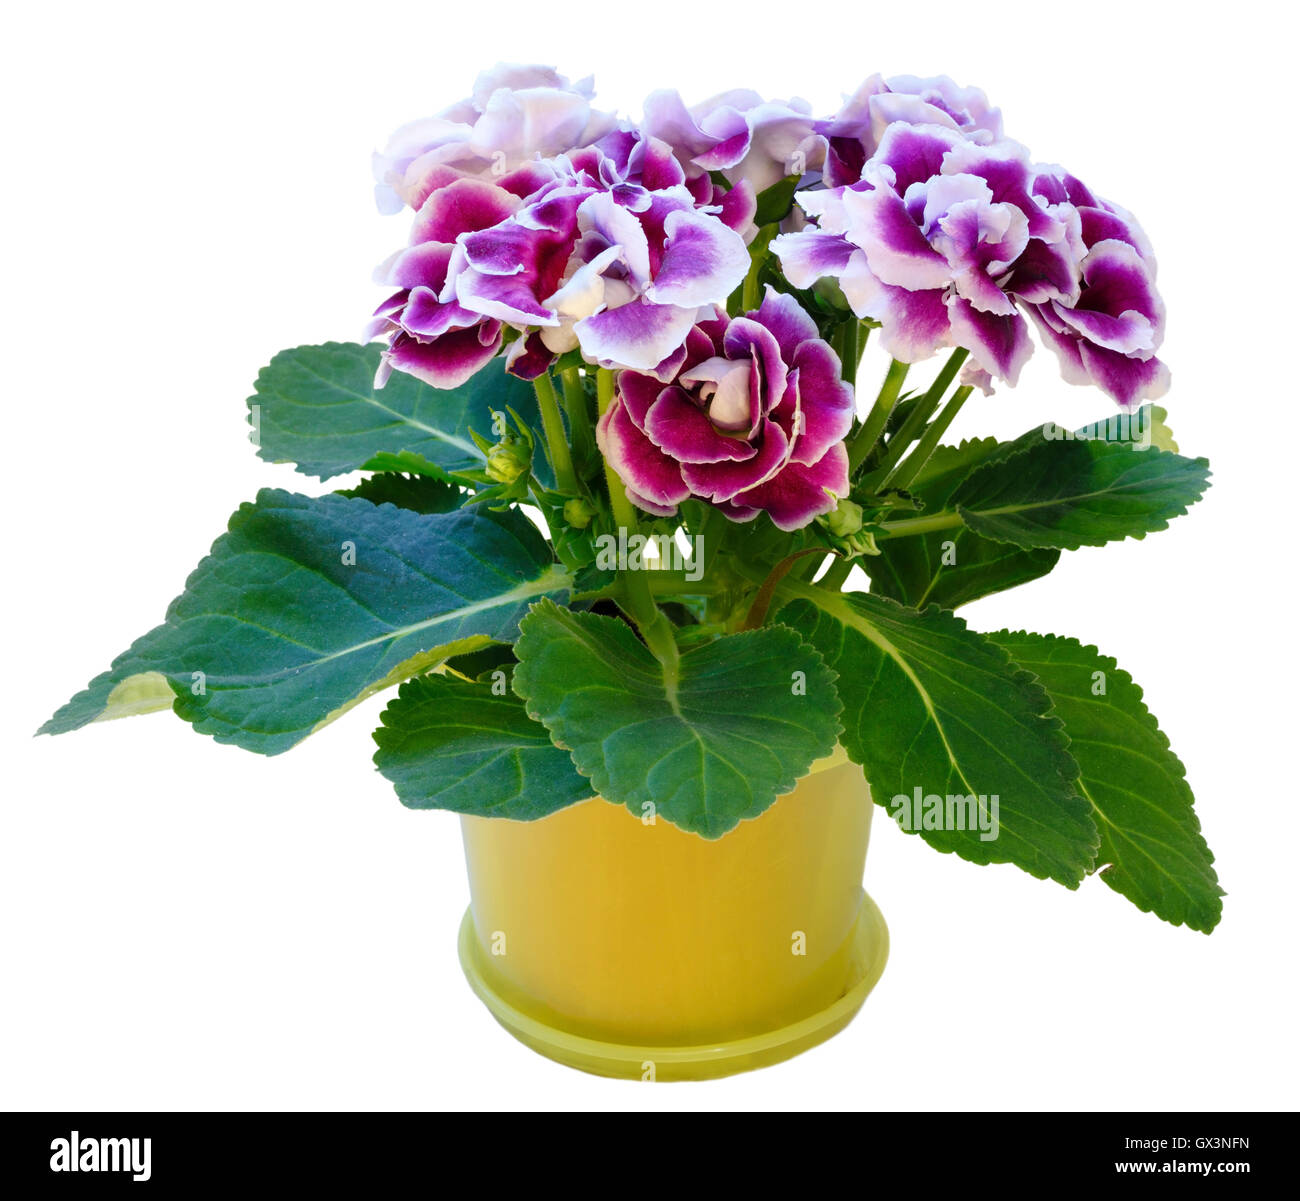 Gloxinia plant with violet-white flowers in flowerpot isolated on white  Stock Photo - Alamy